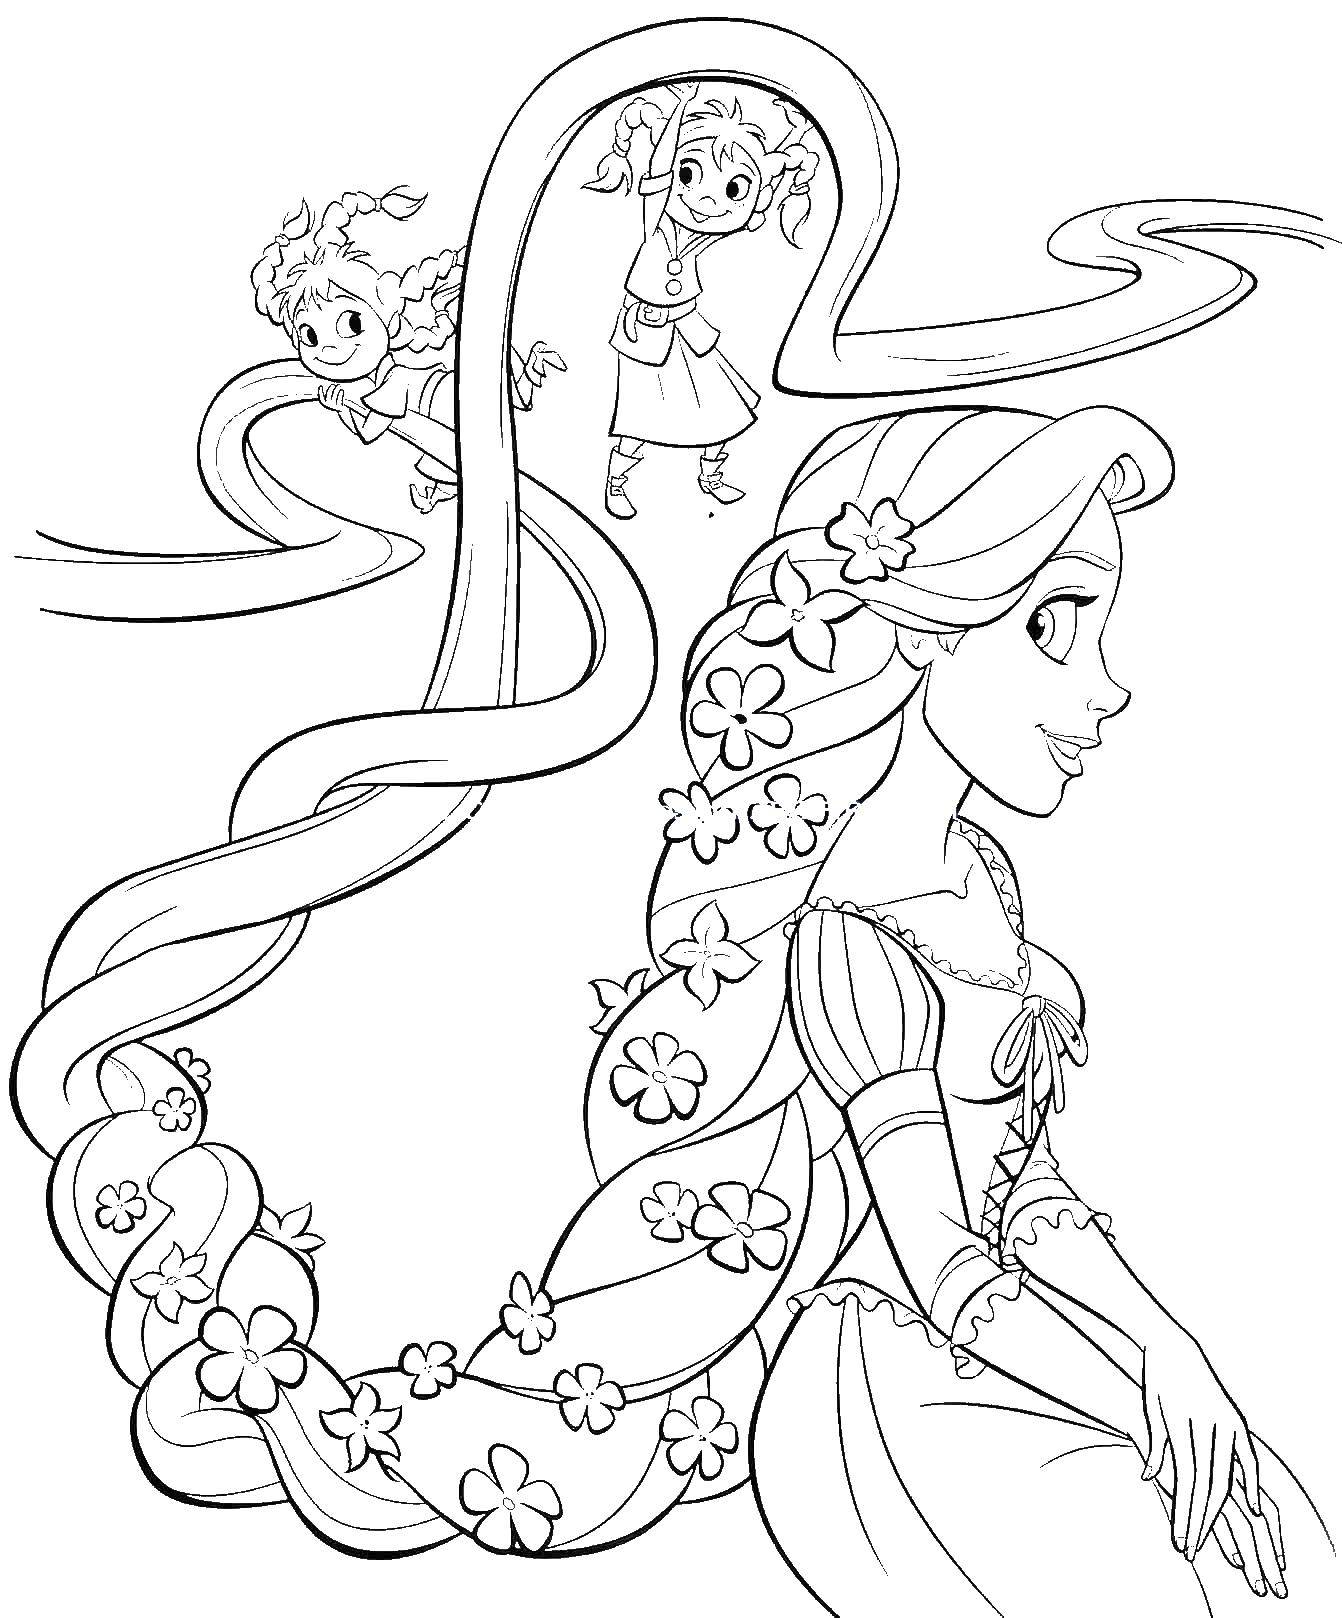 Coloring Rapunzel with long hair. Category coloring pages Rapunzel tangled. Tags:  Rapunzel , a tangled tale.